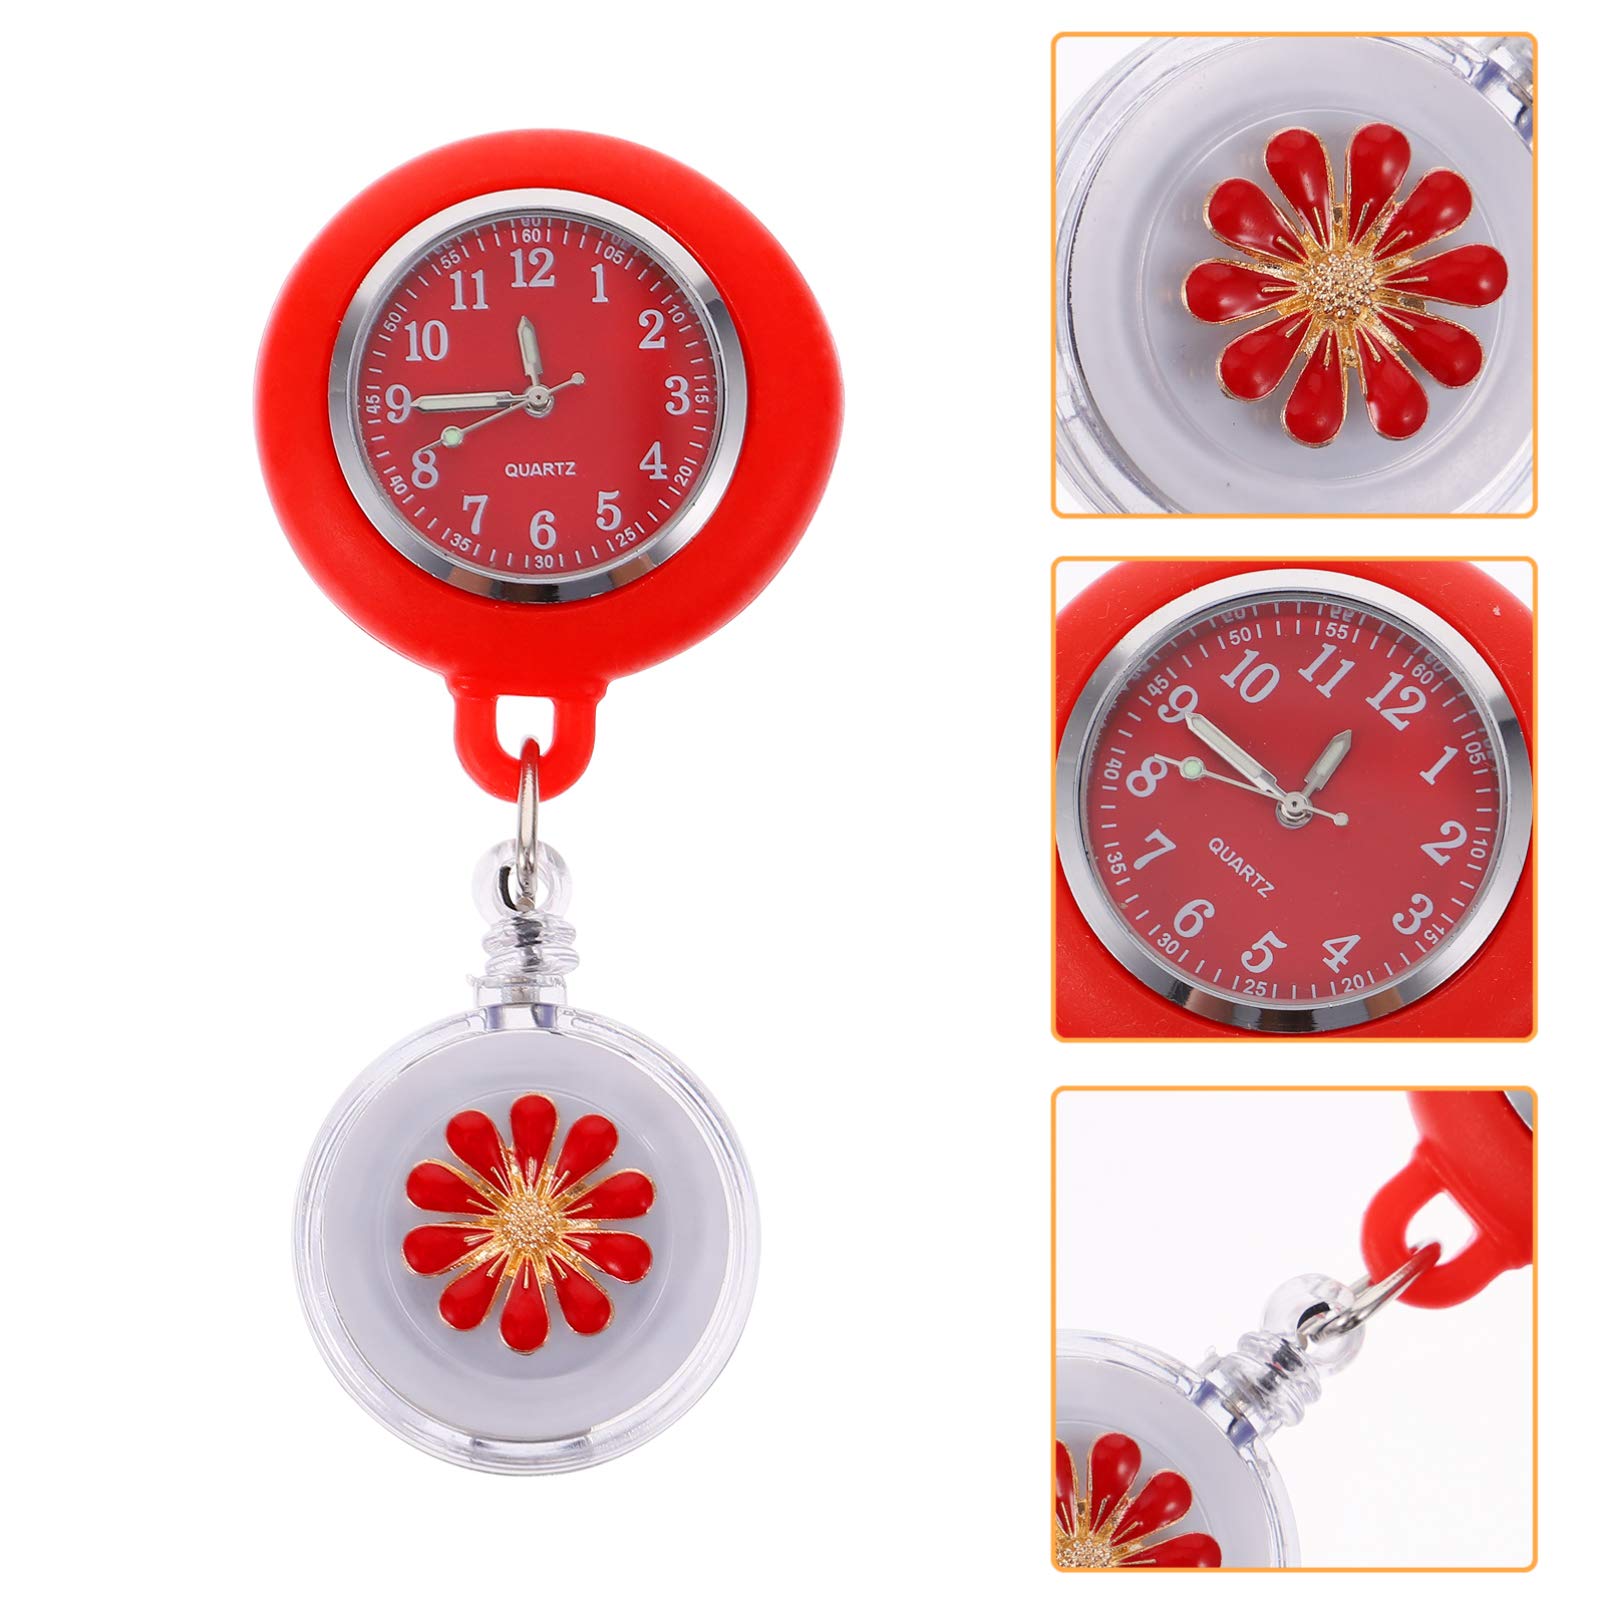 Hemobllo Womens Digital Watch Nurse Lapel Pin Watch Retractable Clip- on Hanging Doctor Pocket Watch Daisy Flower Movement Watch for 2021 New Year Graduation Students Gifts Red Student Nurse Badge